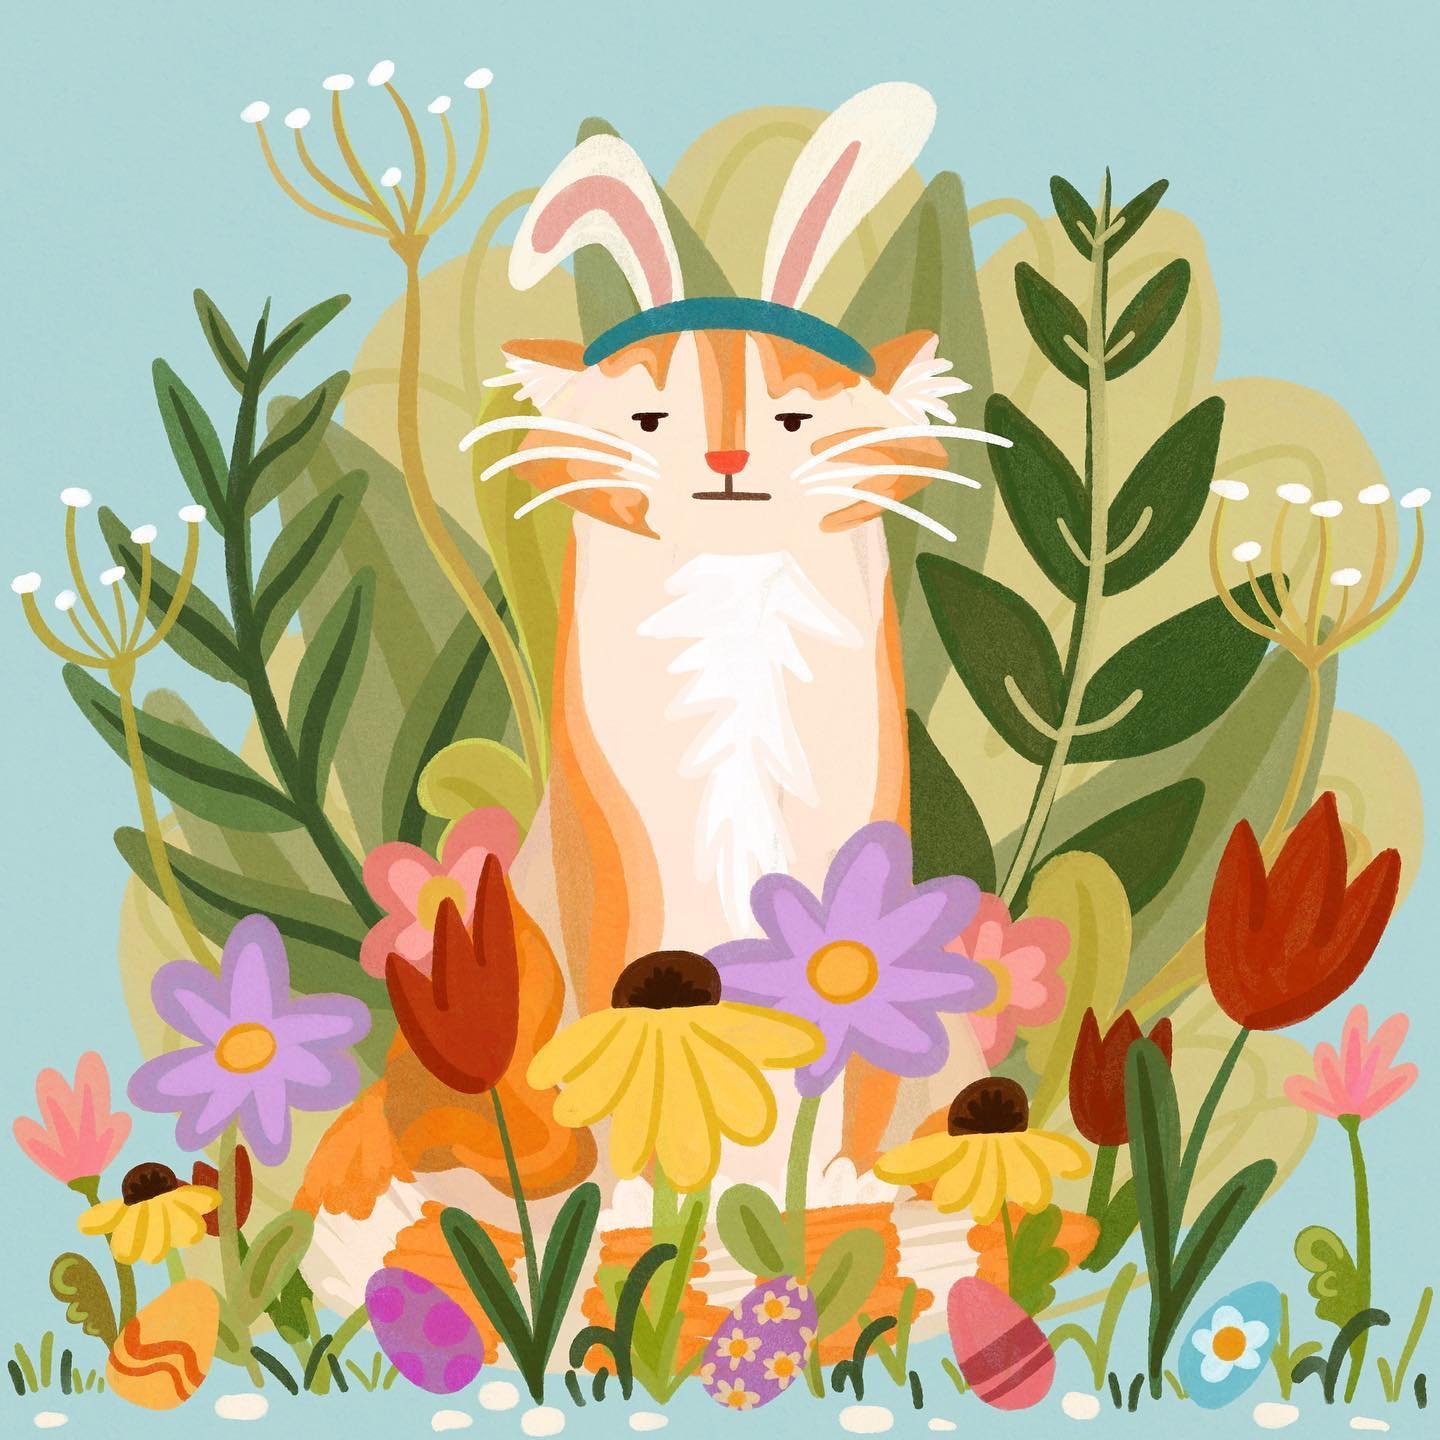 a very happy easter to all who celebrate!

#illustrator #illustrationartists #illustration #artist #art #easter #easterillustration #spring #springart #springillustration #digitalart #digitalpainting #sketchbook #freelance #freelanceartist #freelance